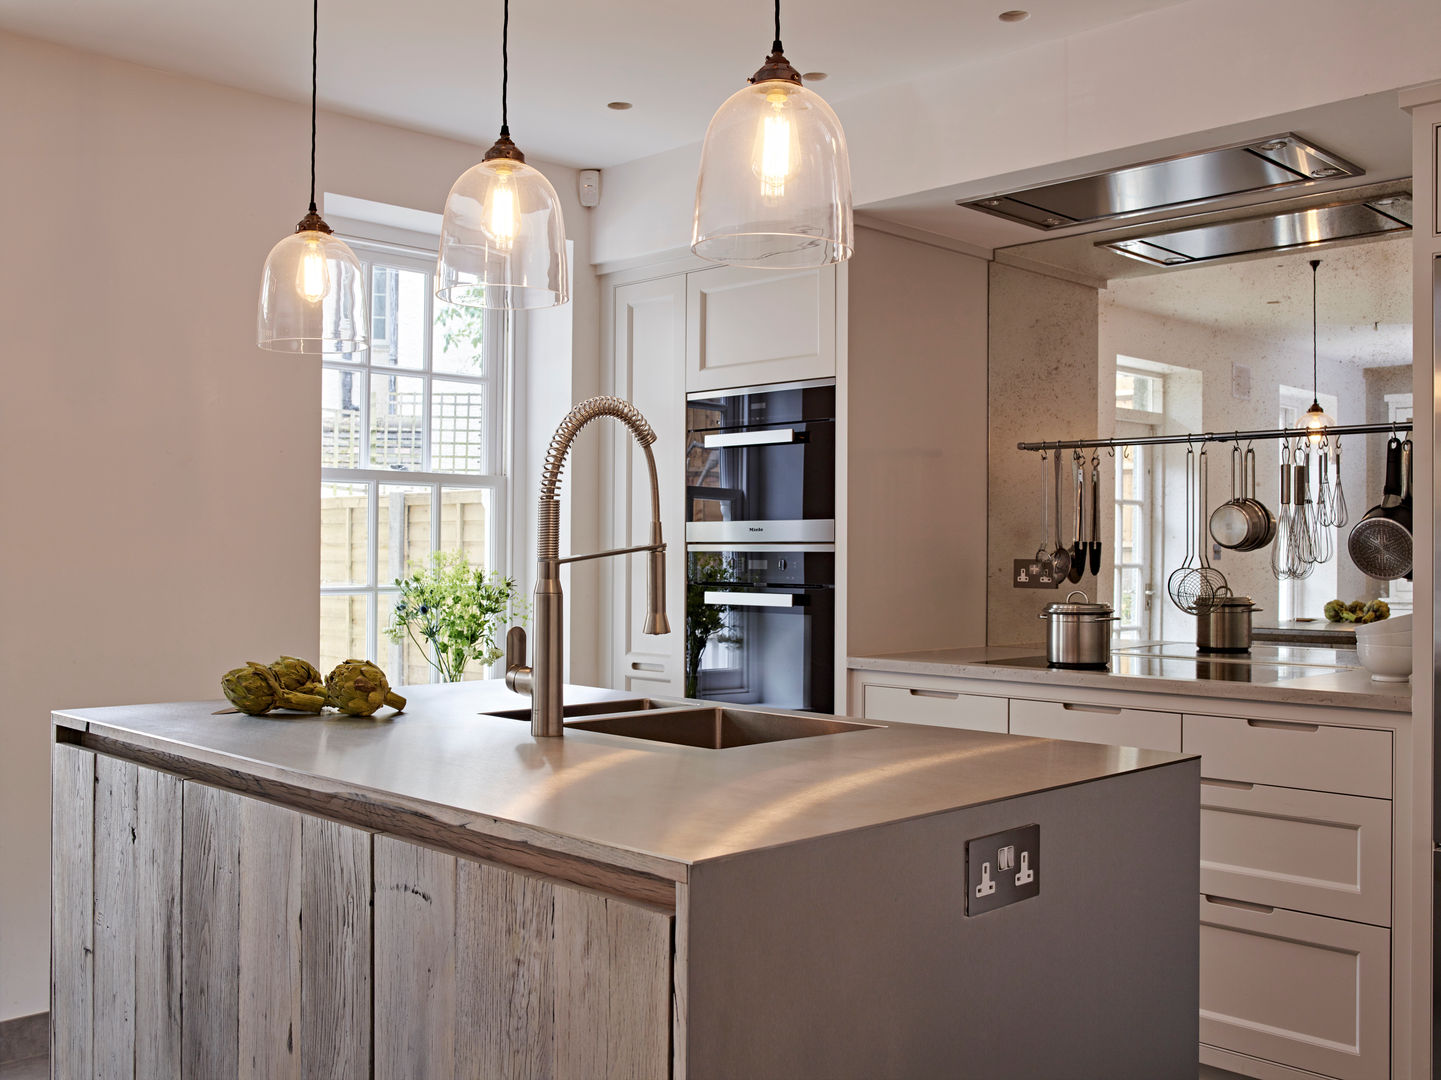 Kitchen design for small spaces, Holloways of Ludlow Bespoke Kitchens & Cabinetry Holloways of Ludlow Bespoke Kitchens & Cabinetry Dapur Gaya Industrial Kayu Wood effect Lighting